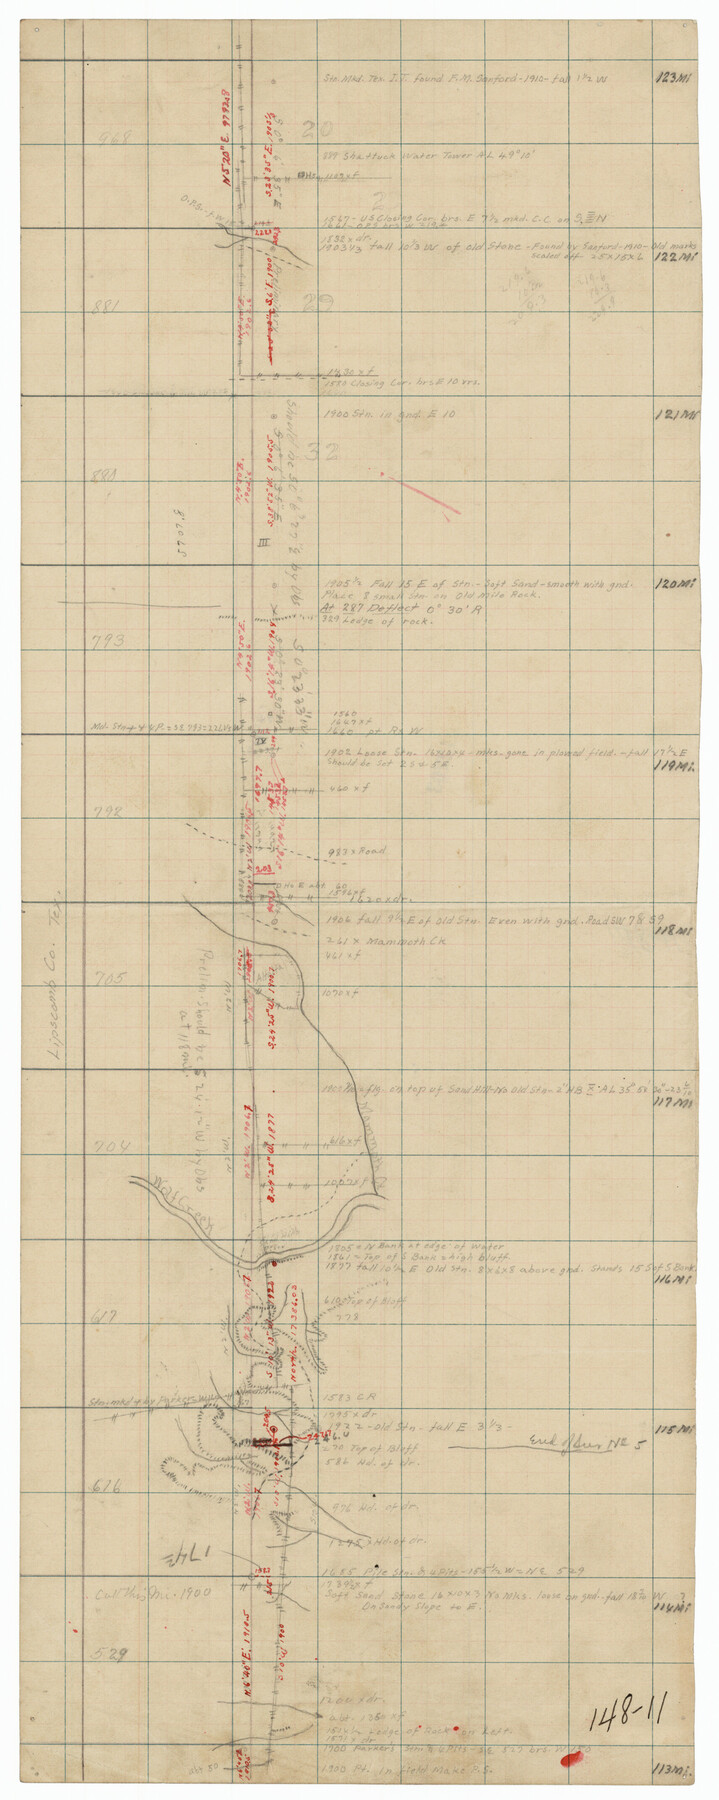 91318, East Line of Lipscomb County, Twichell Survey Records